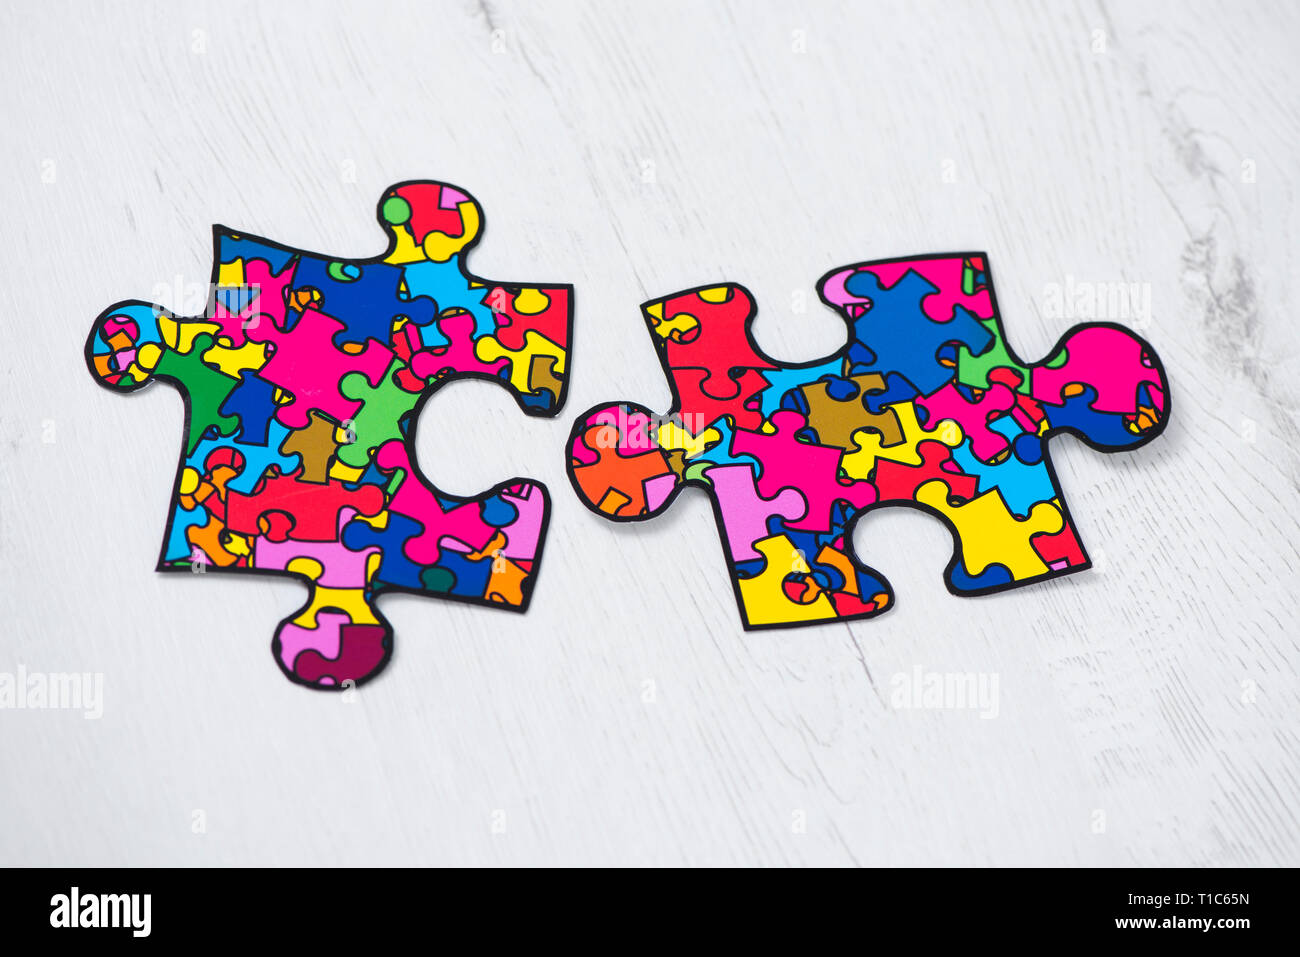 two puzzle pieces patterned with many puzzle pieces of different colors, symbol of the autism awareness, on a white rusitc wooden background Stock Photo